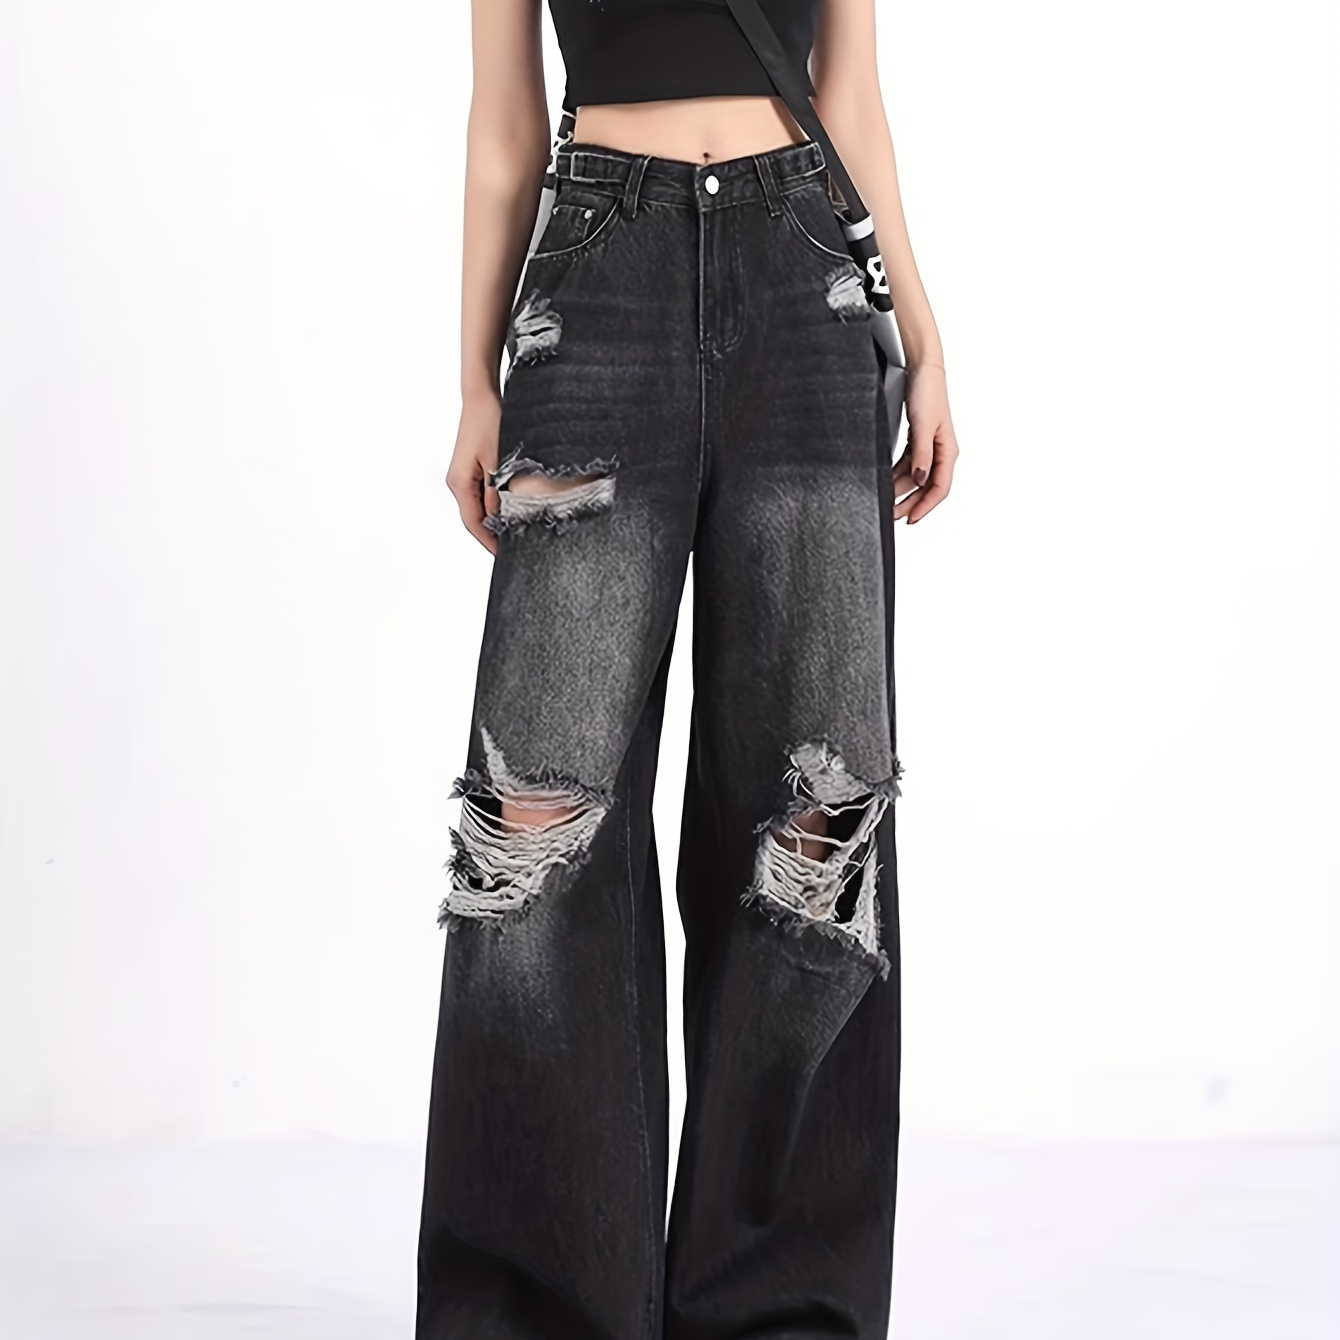 

Women's Retro Ripped High-waist Wide-leg Jeans, Vintage Distressed Loose Fit Denim Pants For Autumn